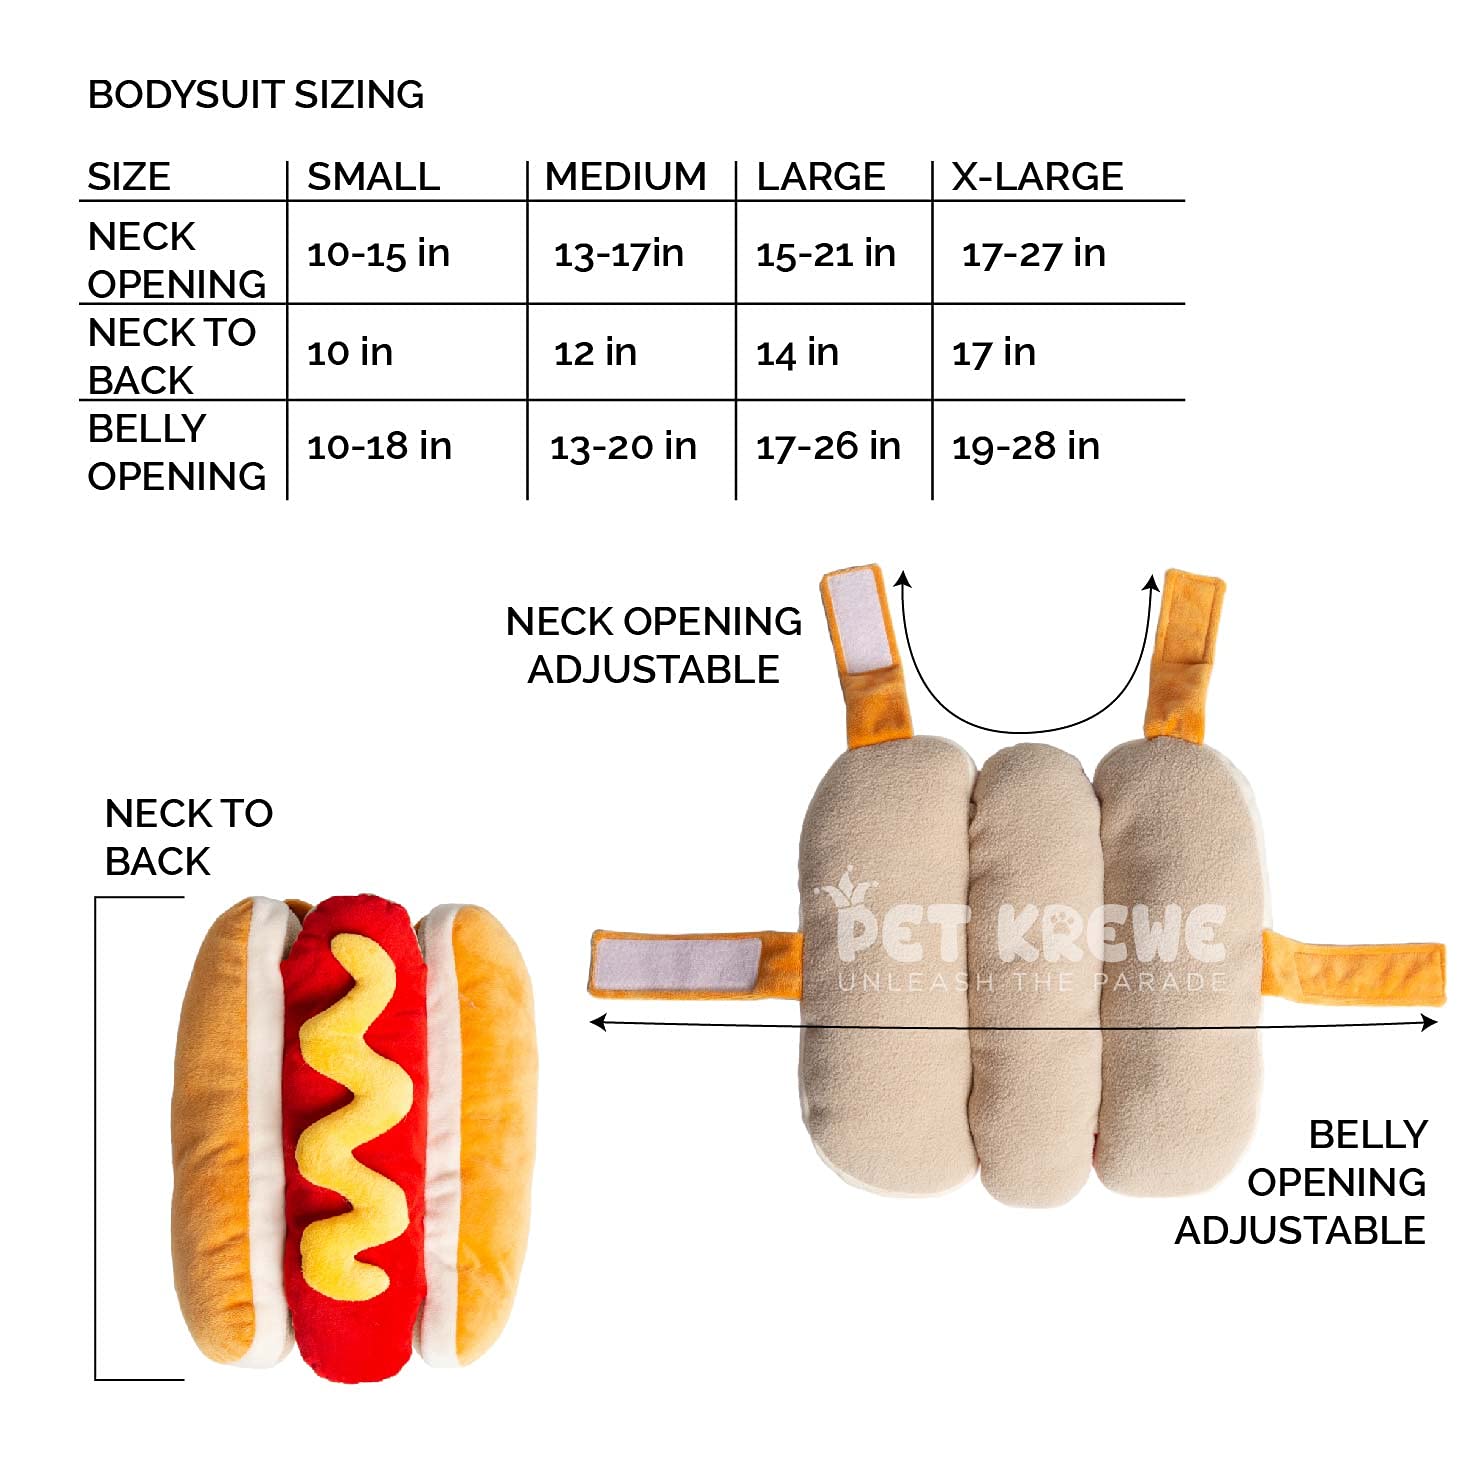 Pet Krewe Hot Dog Costume for Cats and Dogs | Extra Large Pet Wiener Costume for Dogs 1st Birthday, National Cat Day & Celebrations | Halloween Outfit for Small and Large Cats & Dogs  - Very Good